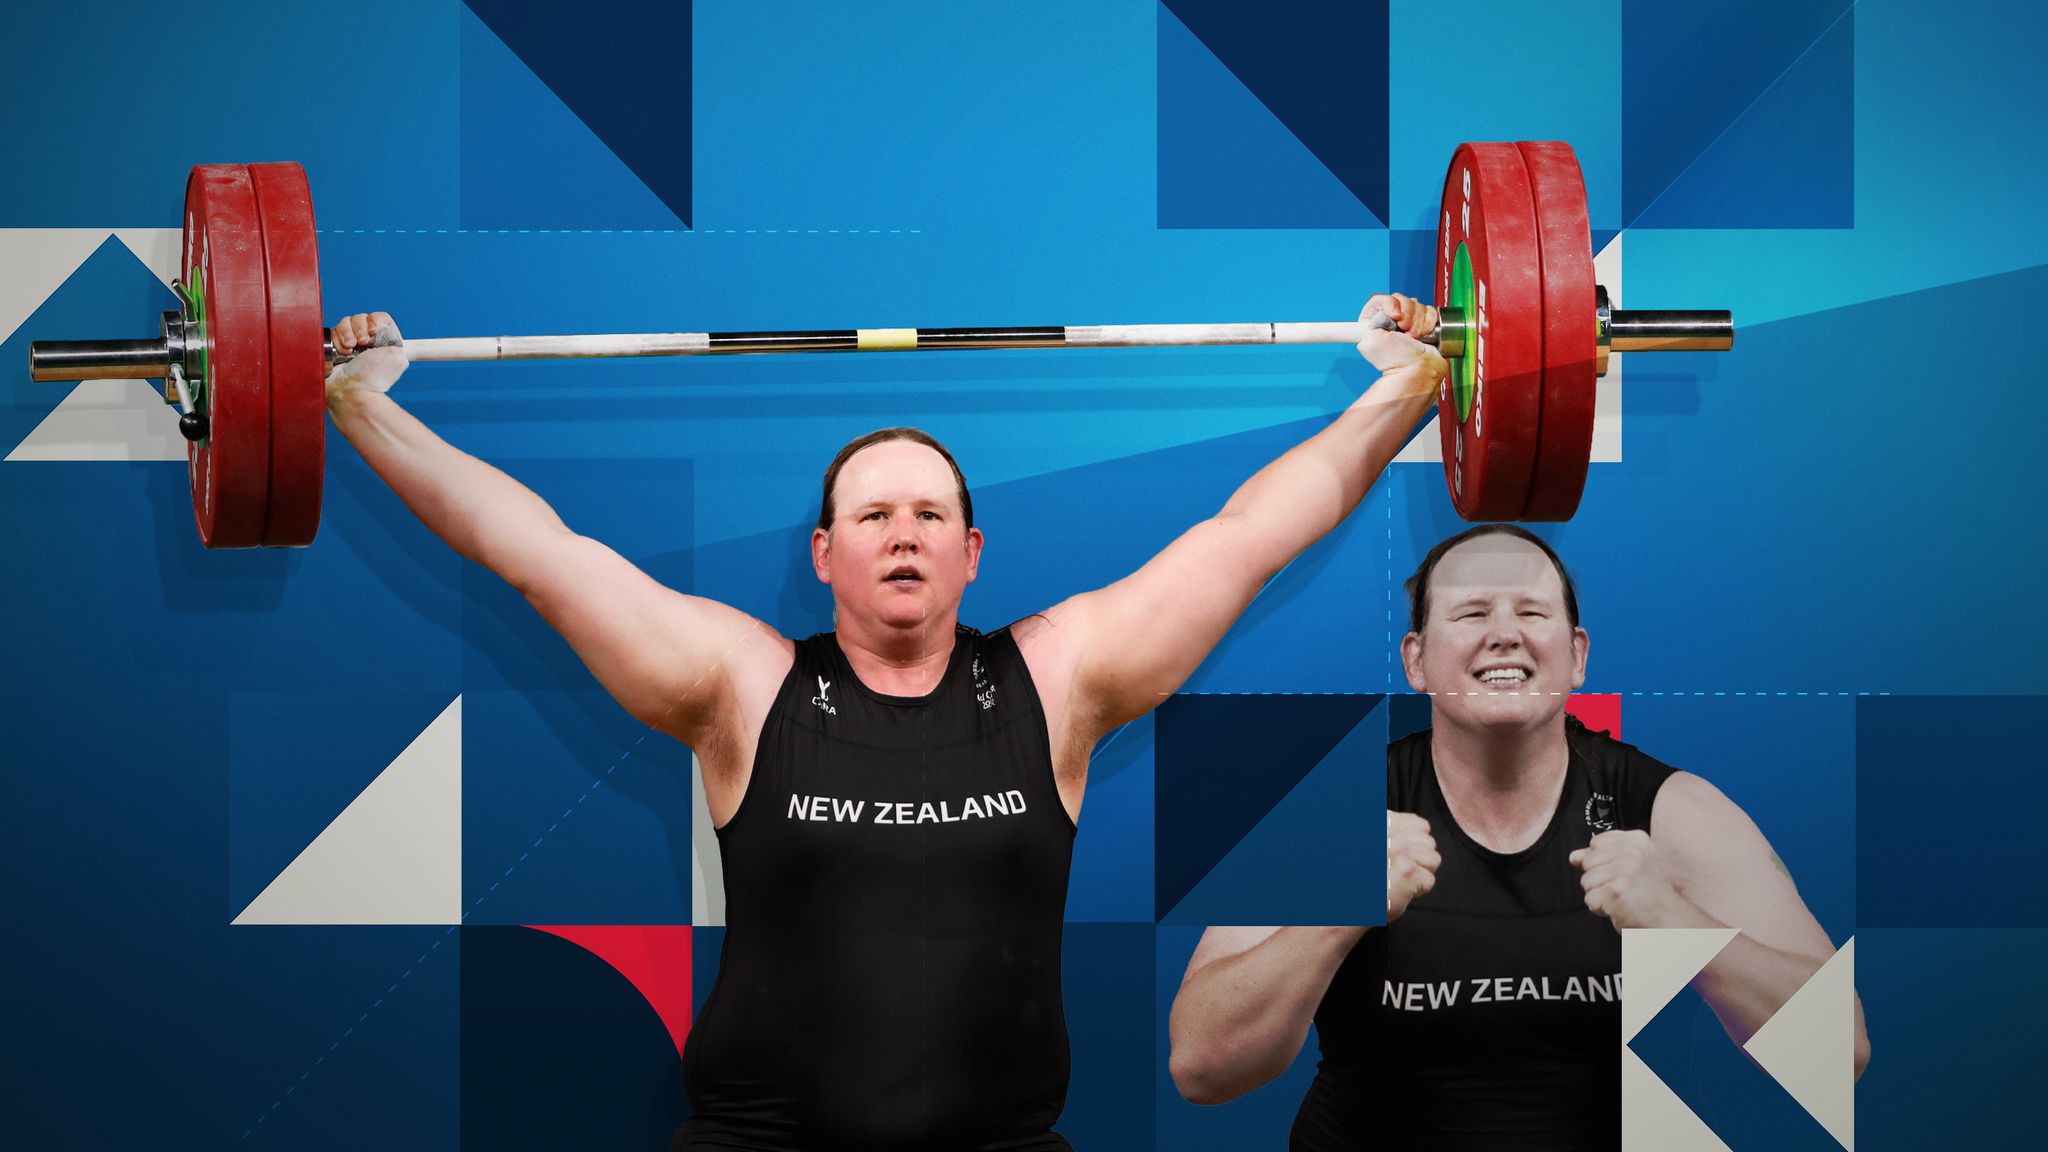 Laurel Hubbard: weightlifter is set to compete in women's event at Tokyo - does she have unfair advantage? | UK News | Sky News